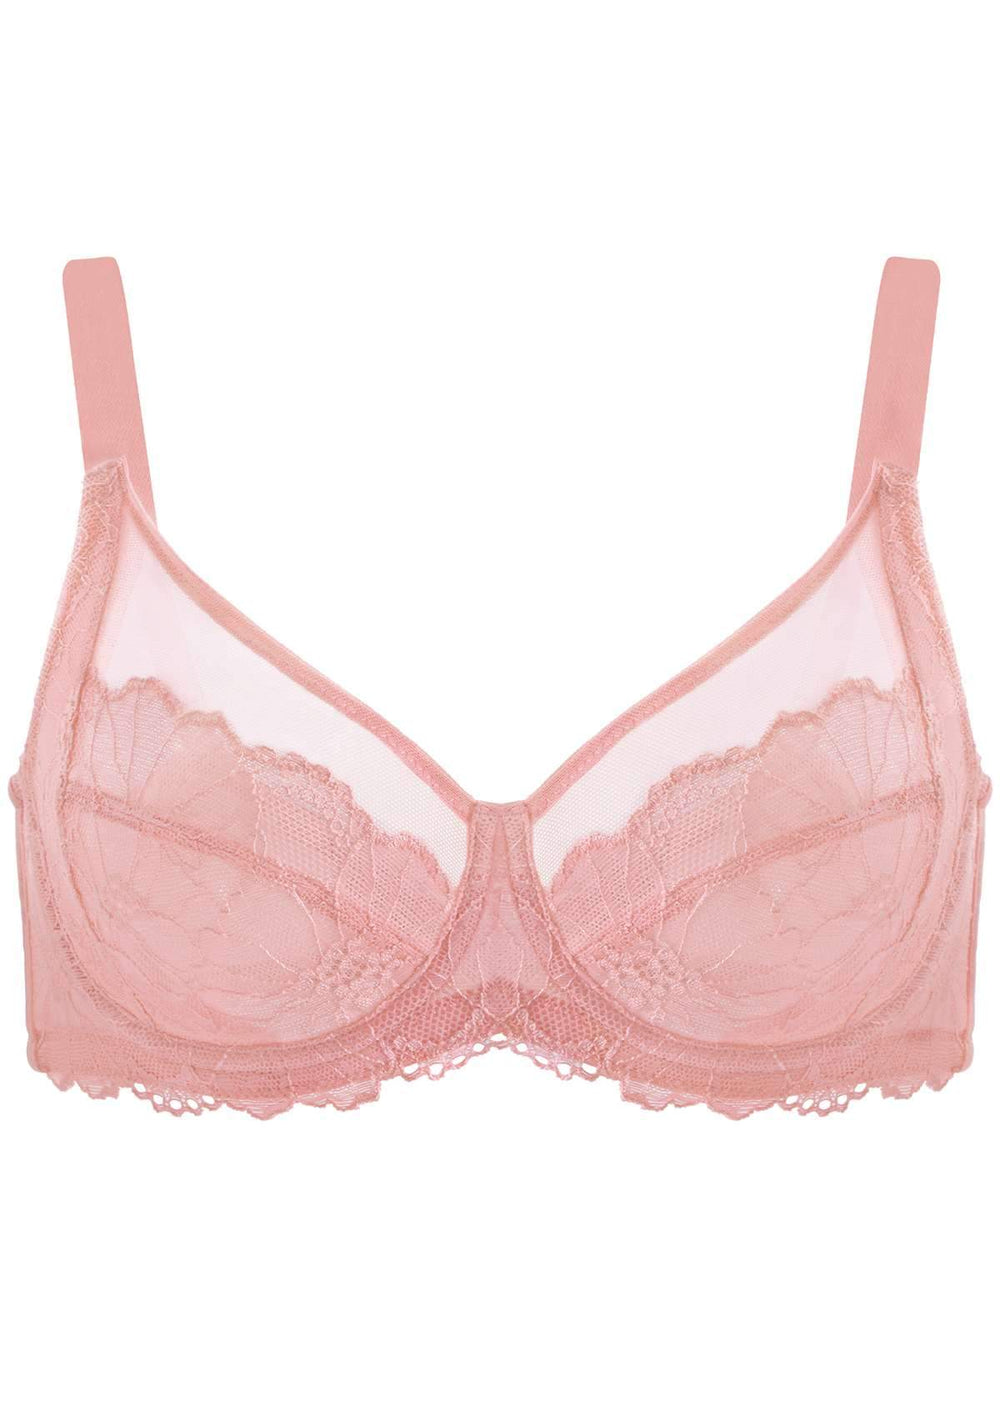 Backless Bra,Lace Minimizer Bras For Women Full Coverage Unlined Underwire  Minimizing Plunge Bra(38.00,Pink)